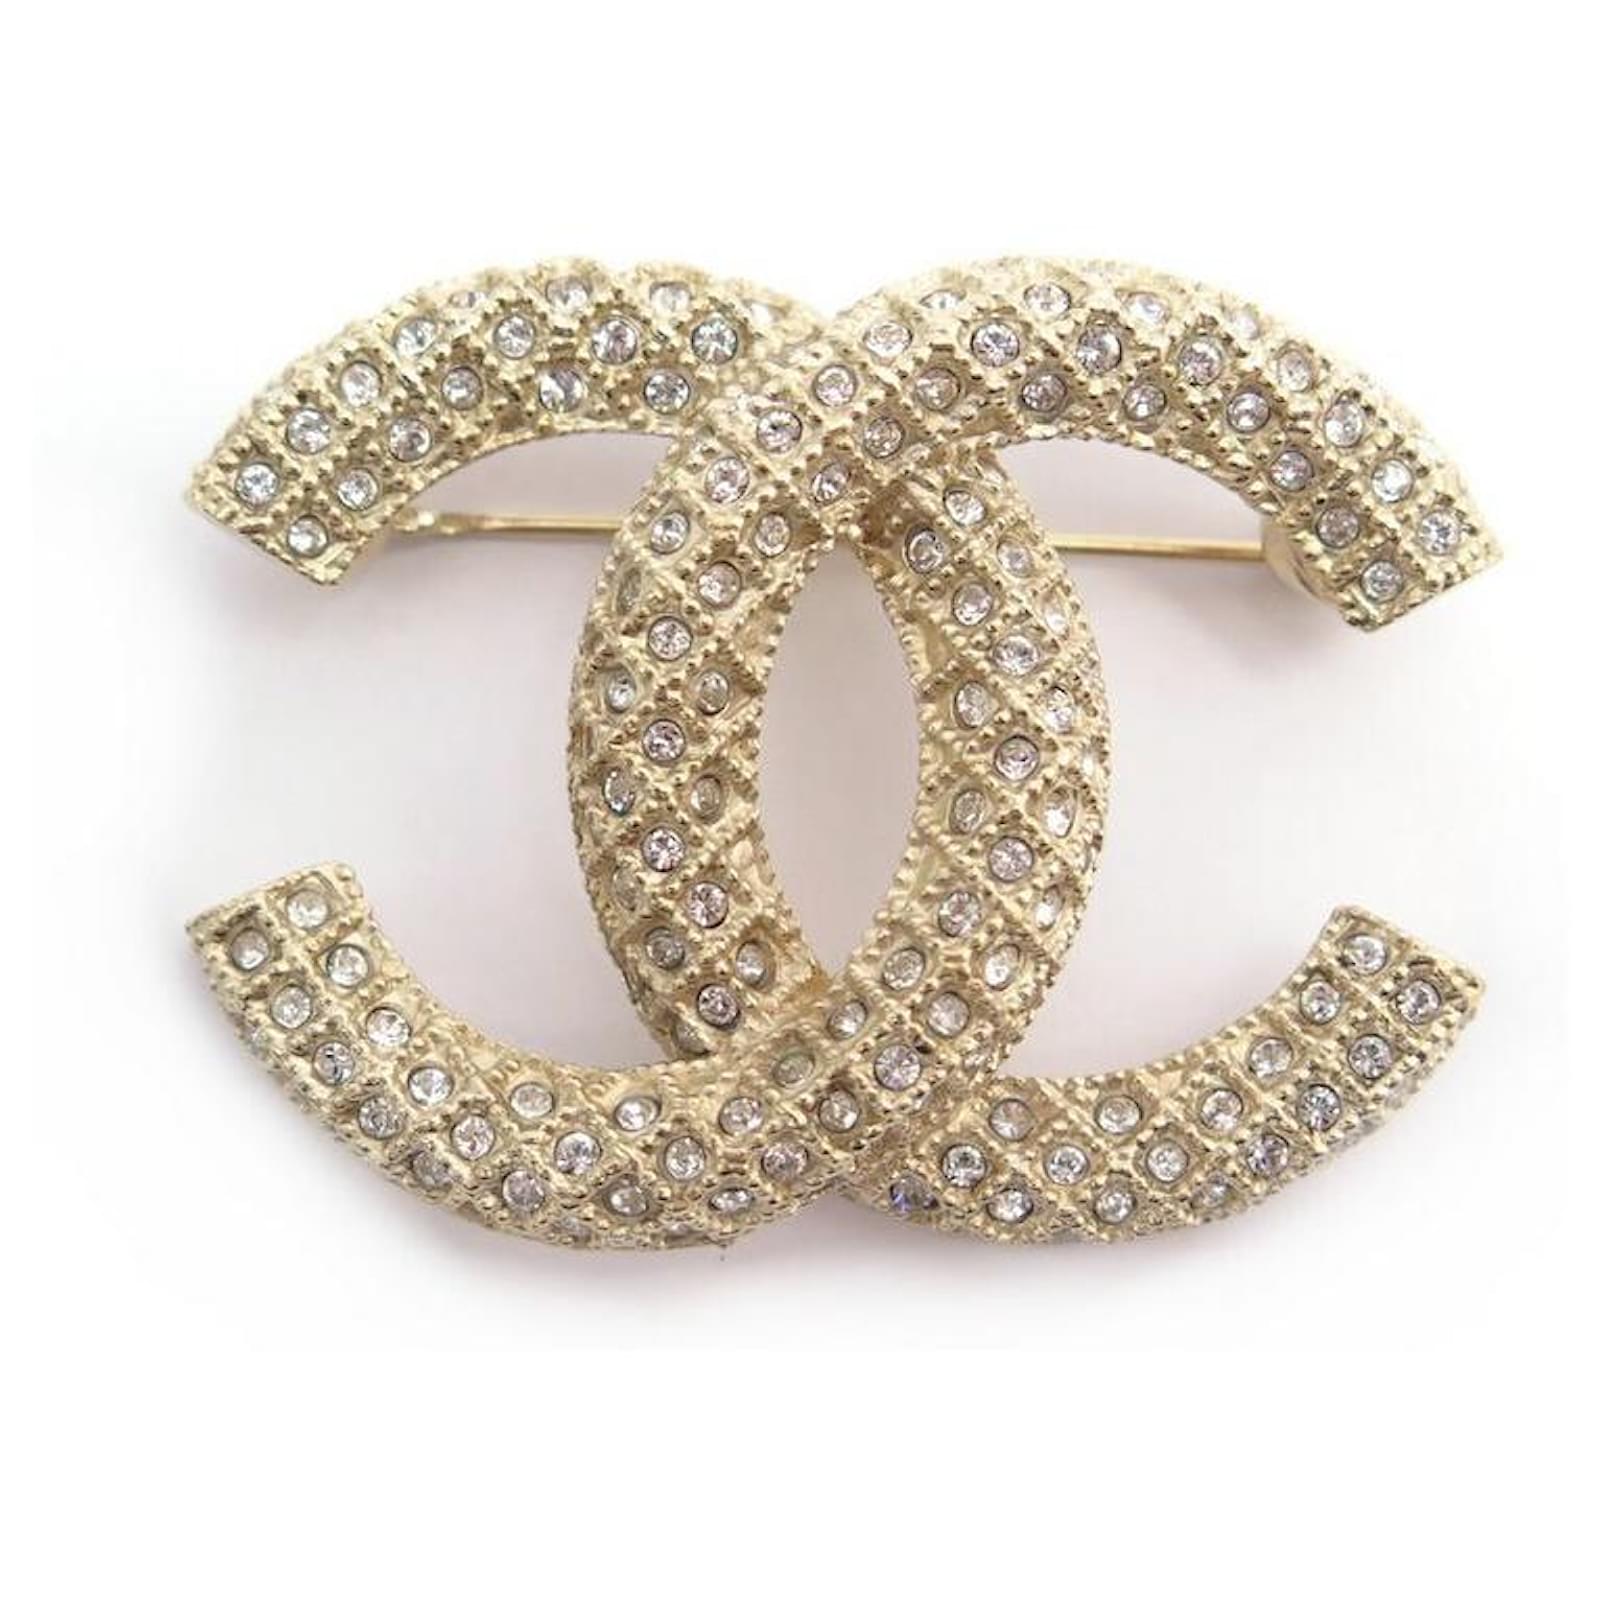 Other jewelry NEW CHANEL LOGO CC & STRASS AB BROOCH5207 IN GOLD METAL NEW  GOLDEN BROOCH ref.376150 - Joli Closet